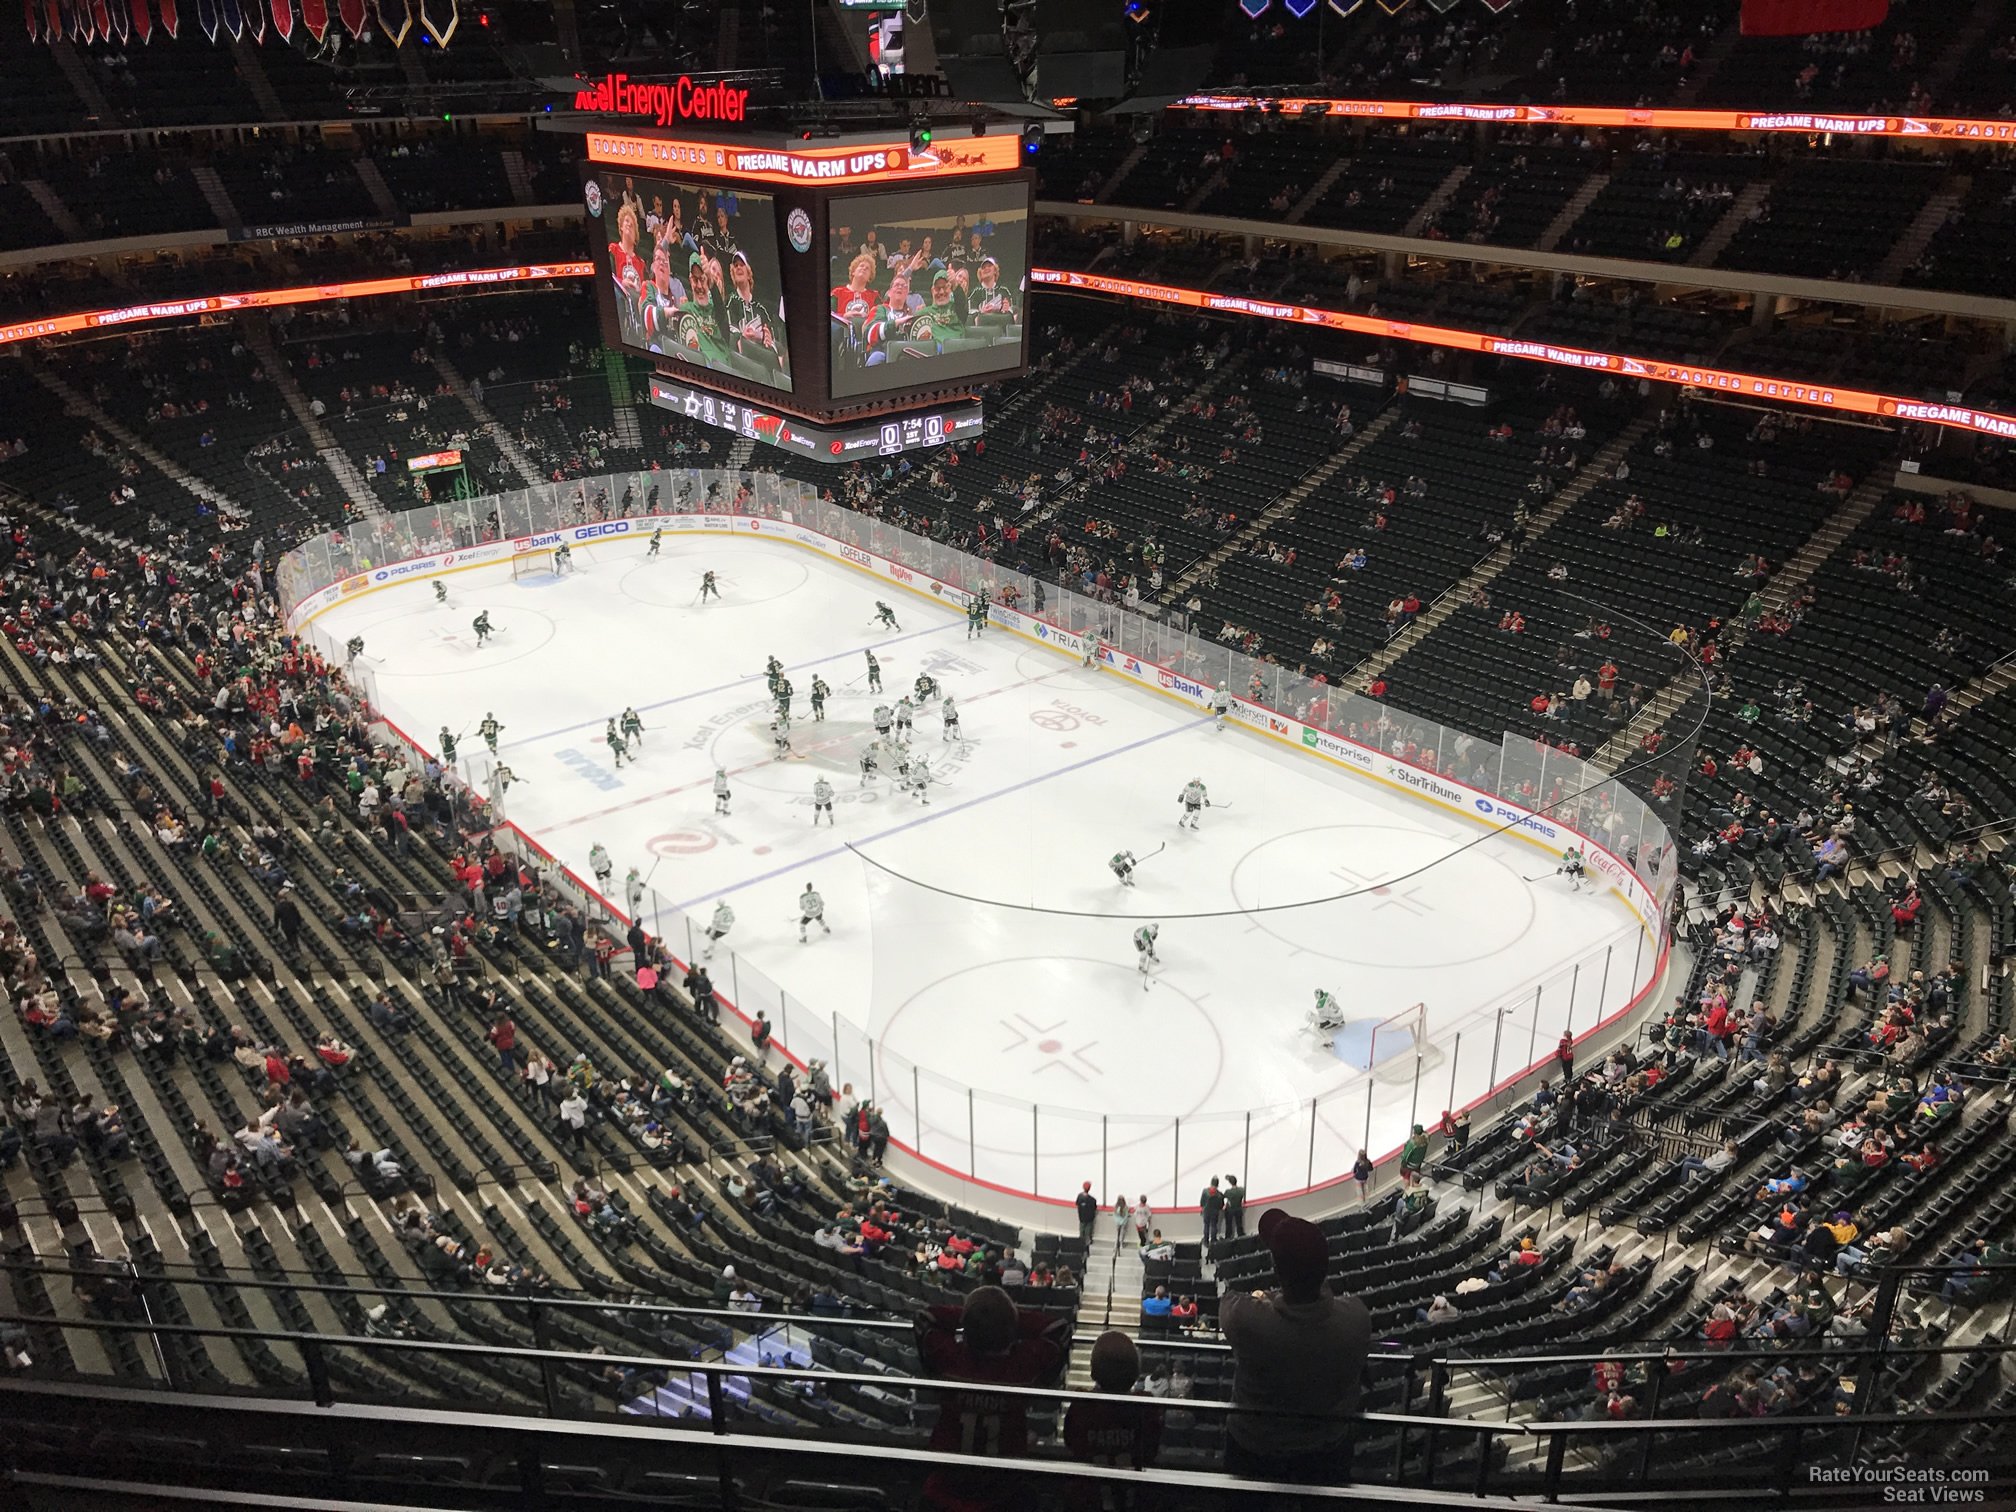 section 215, row 6 seat view  for hockey - xcel energy center